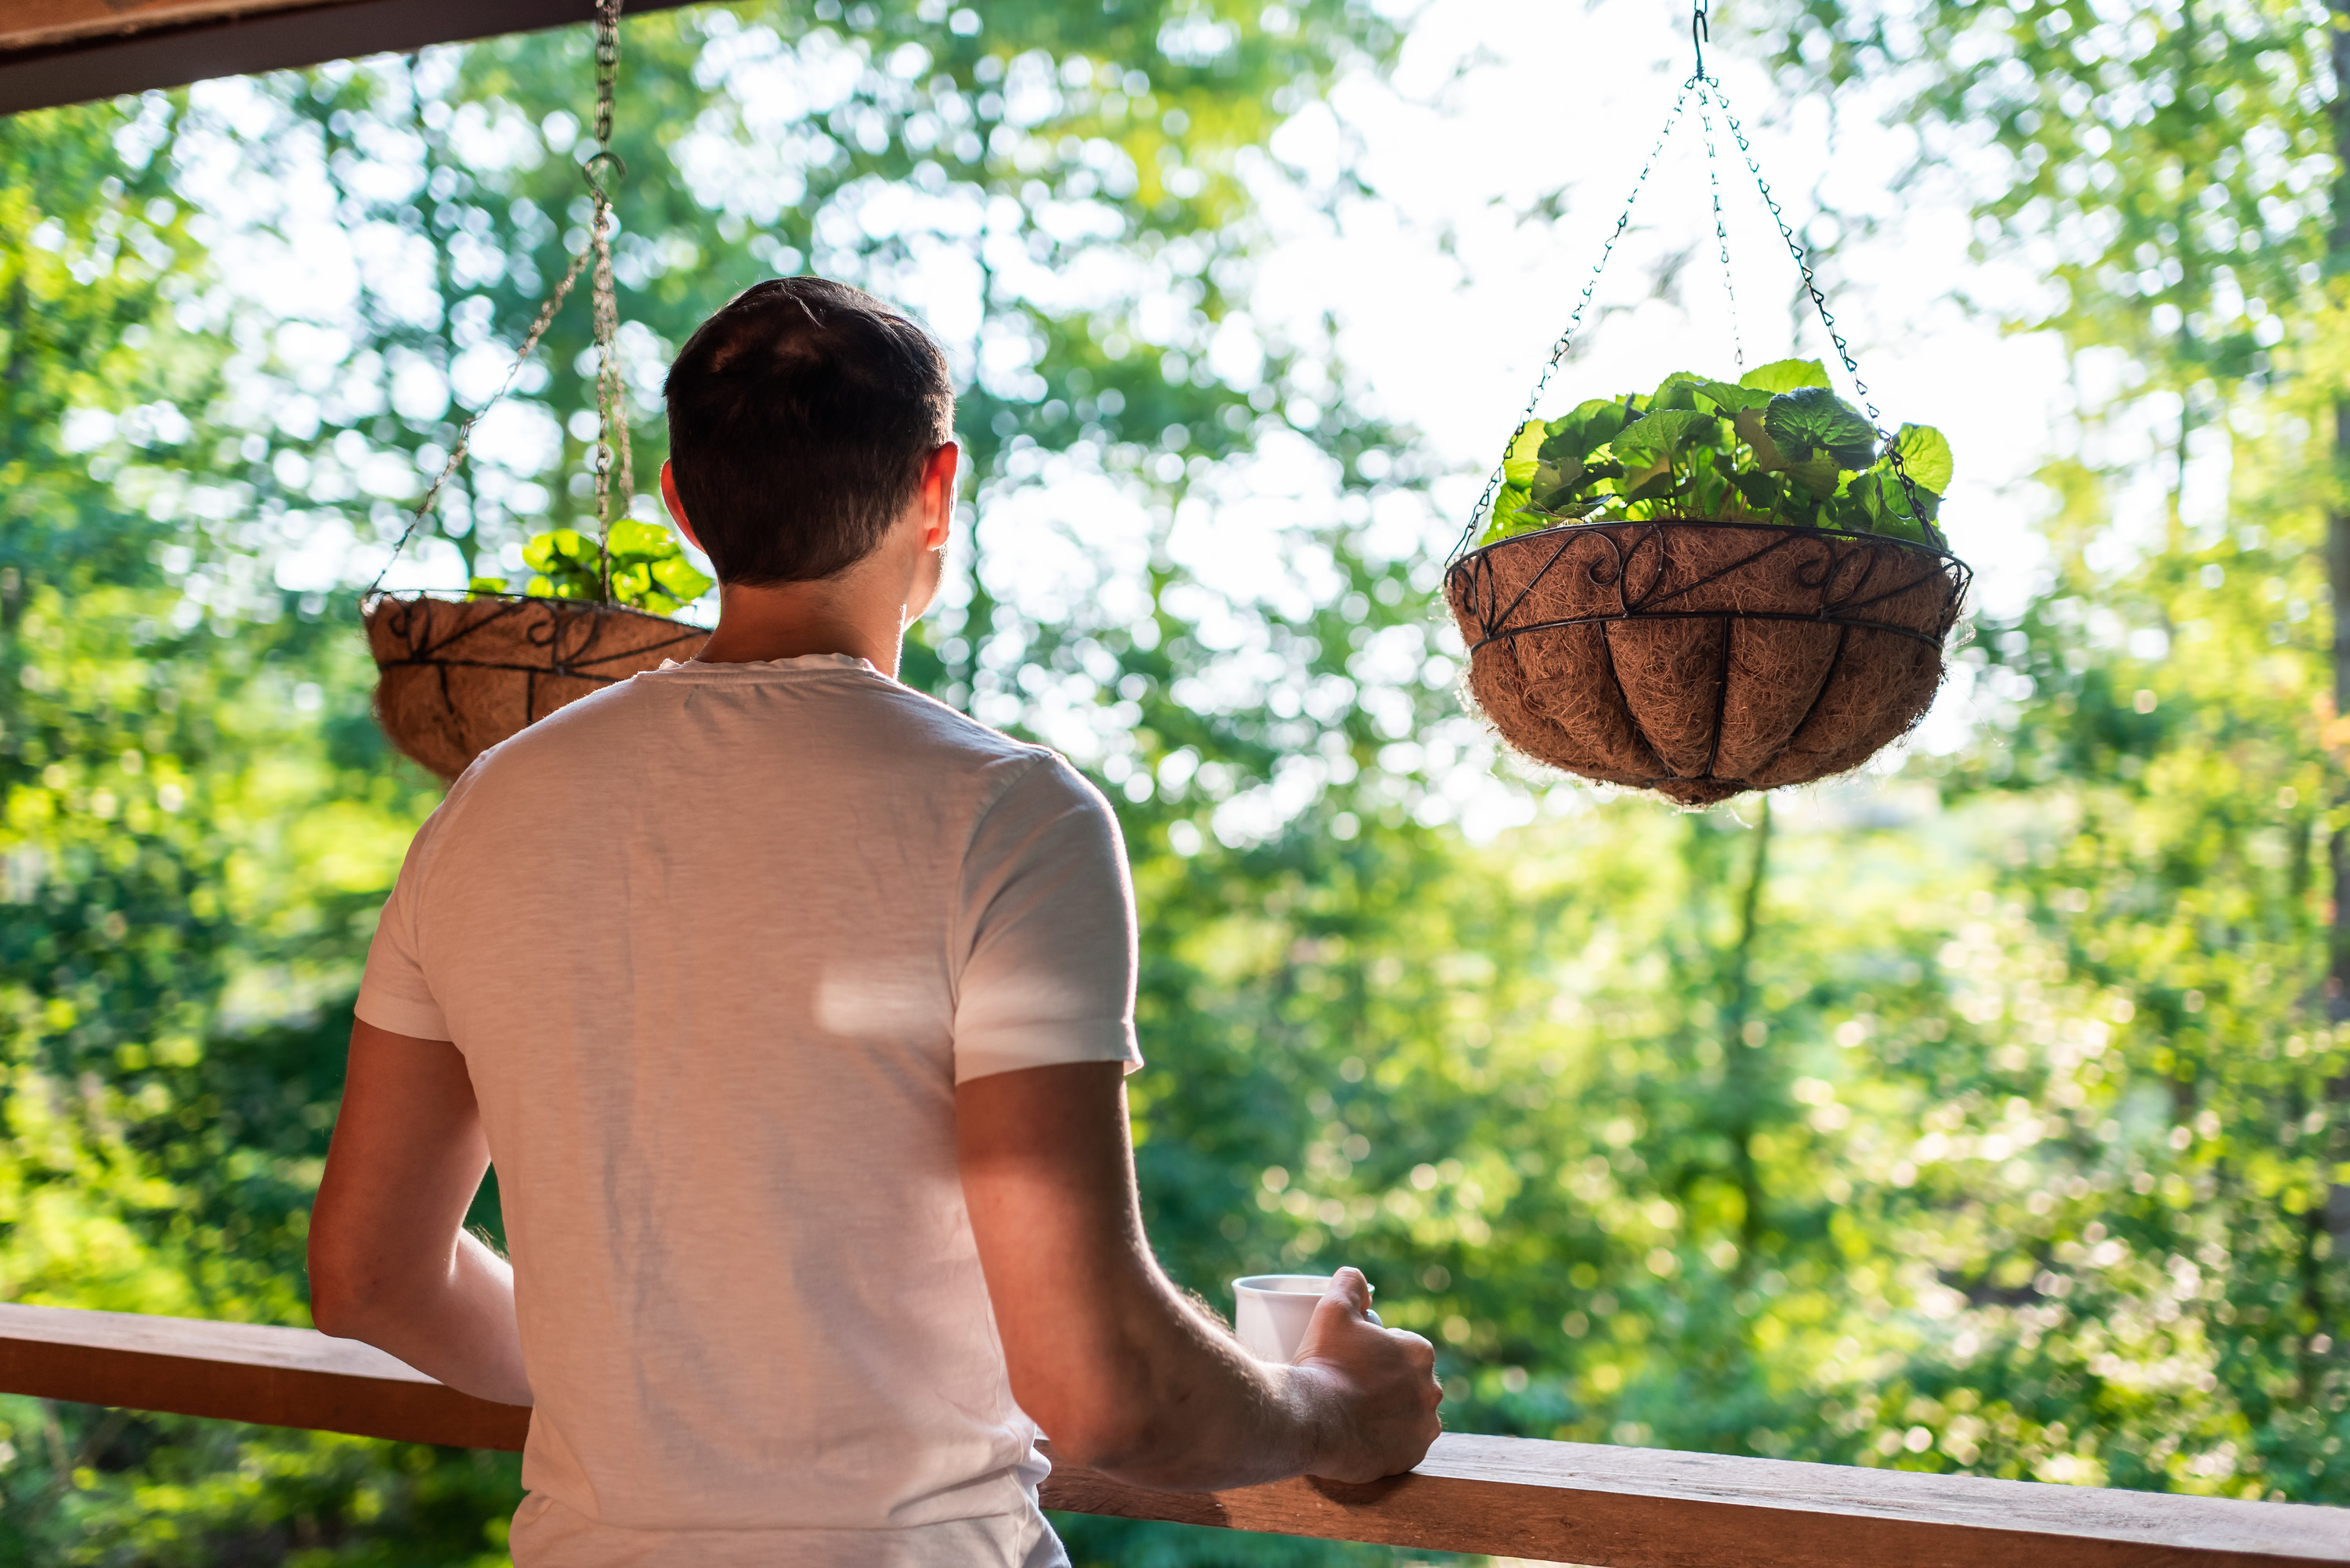 A man looks at the view of trees from his porch and drinks coffee